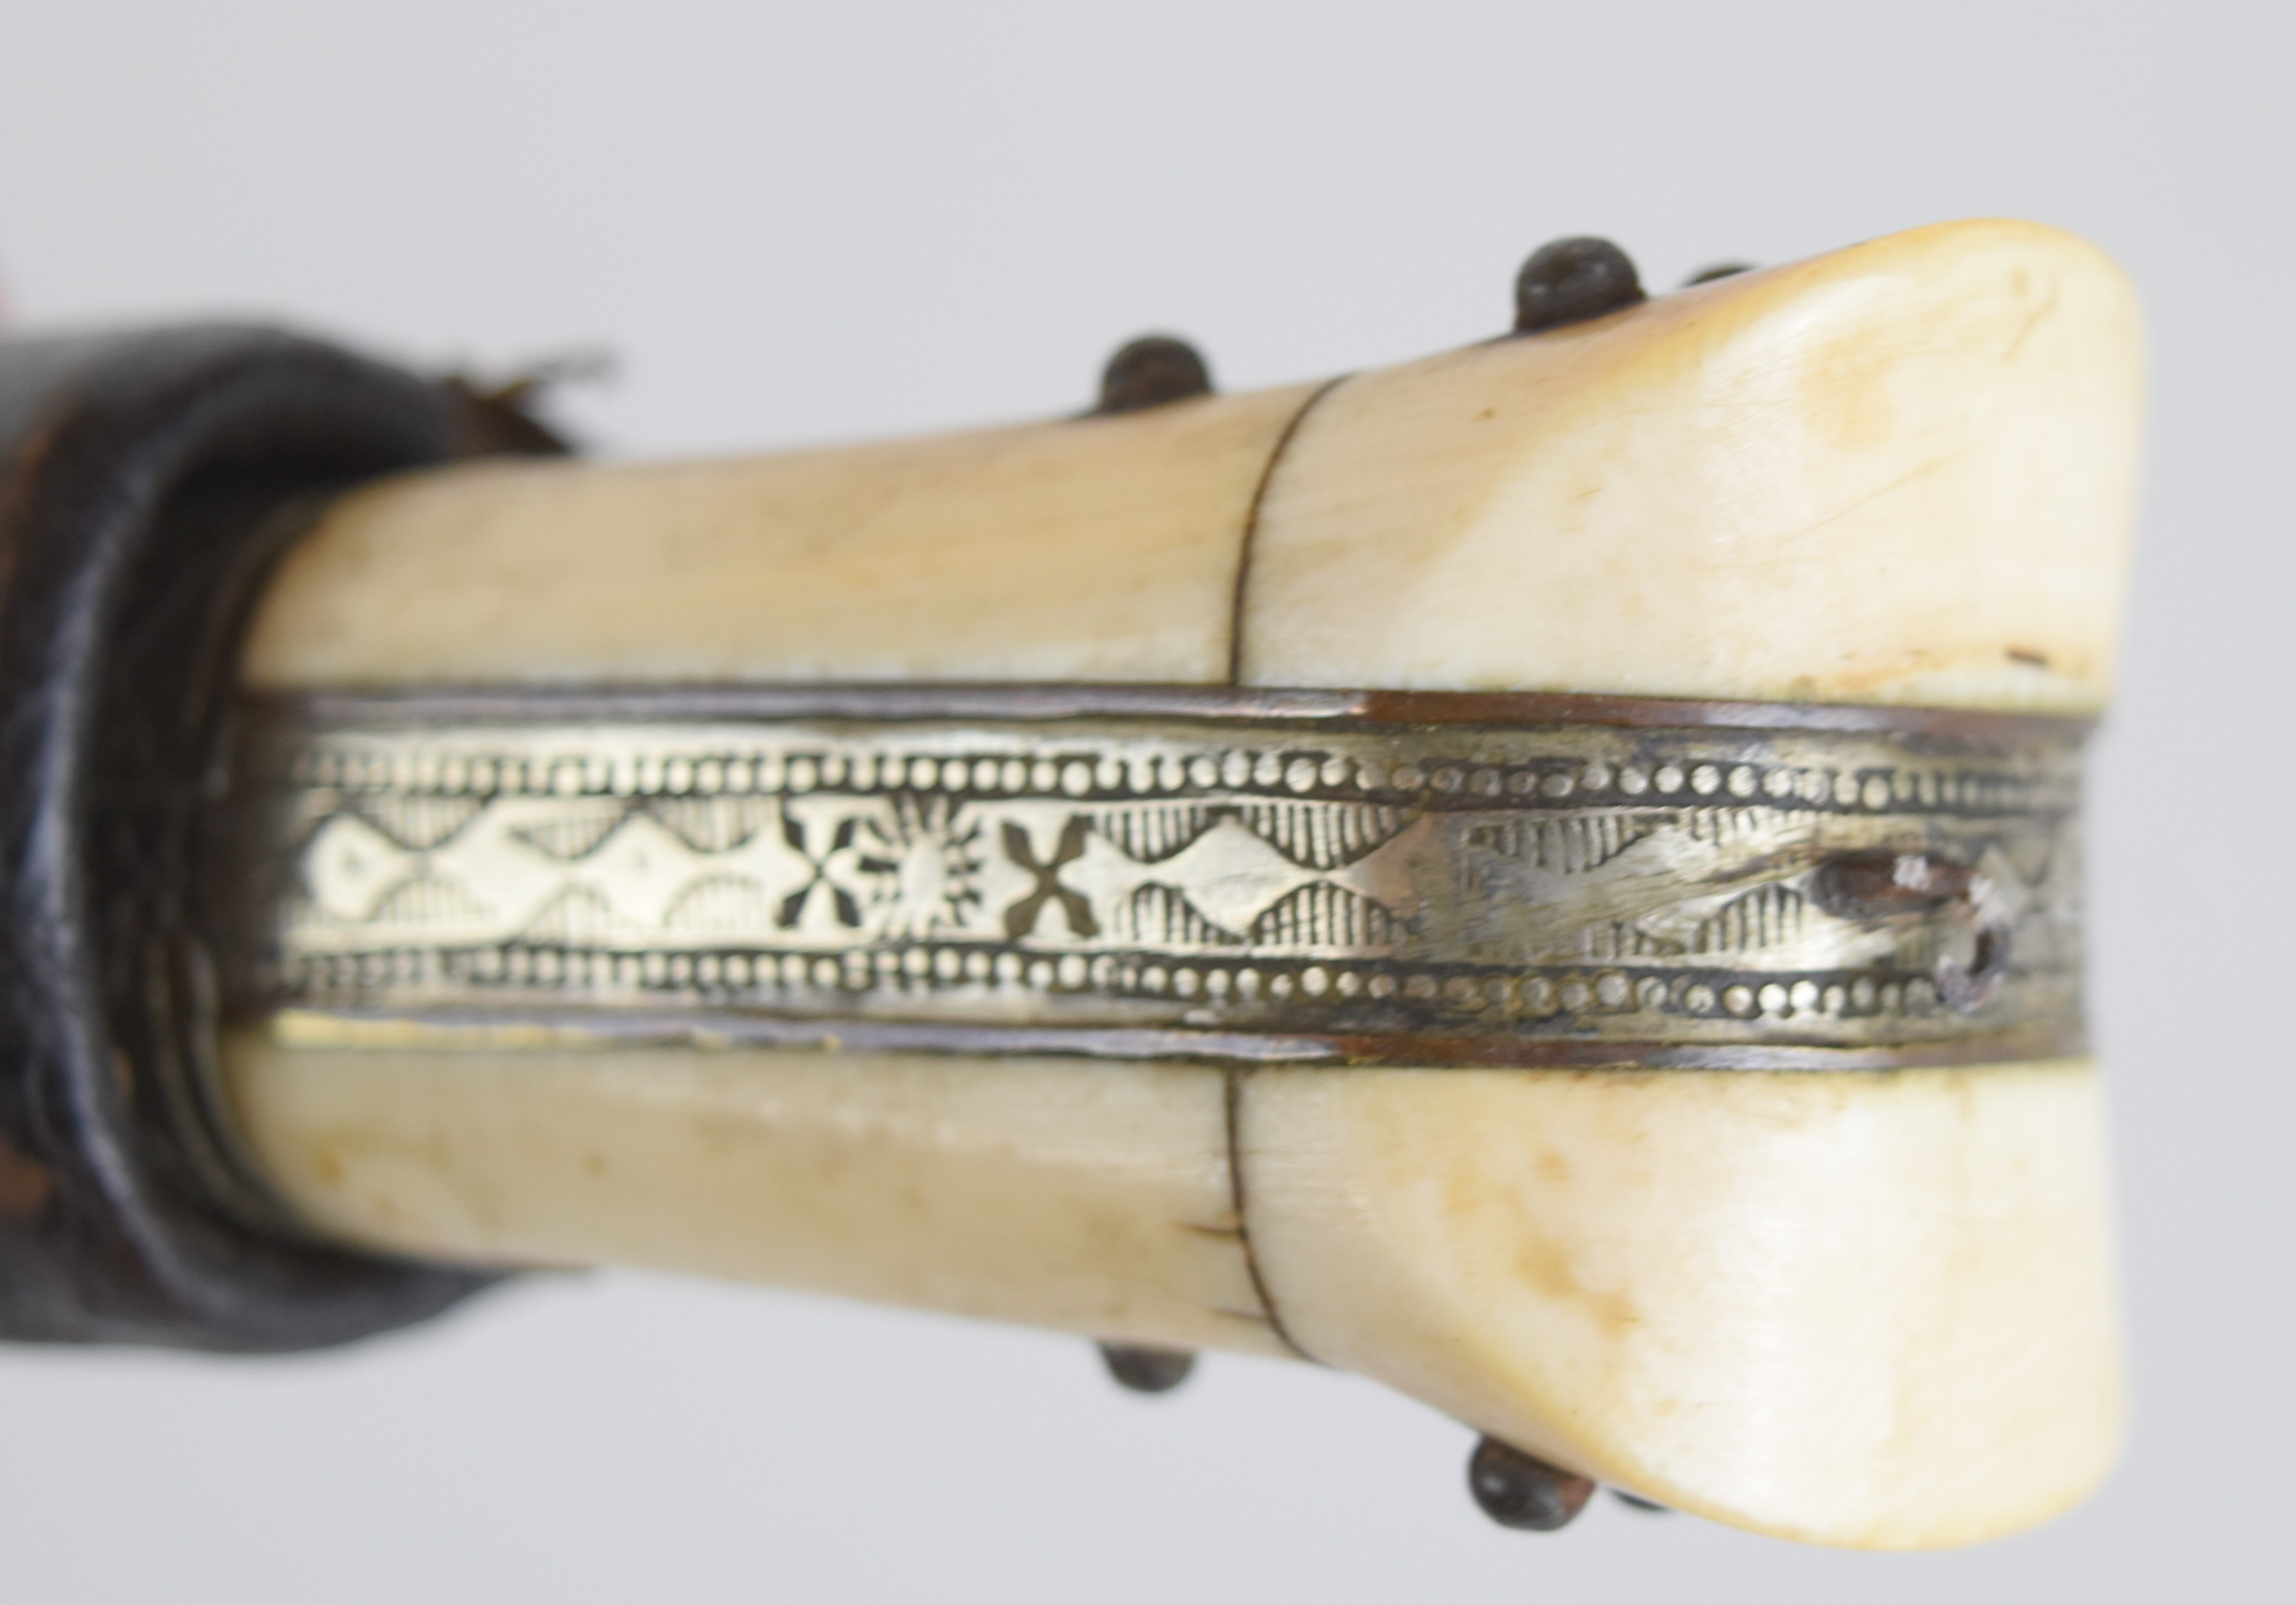 Indo Persian Pesh-Kabz knife or dagger with ivory grips to the curved handle, engraved decoration - Image 8 of 8